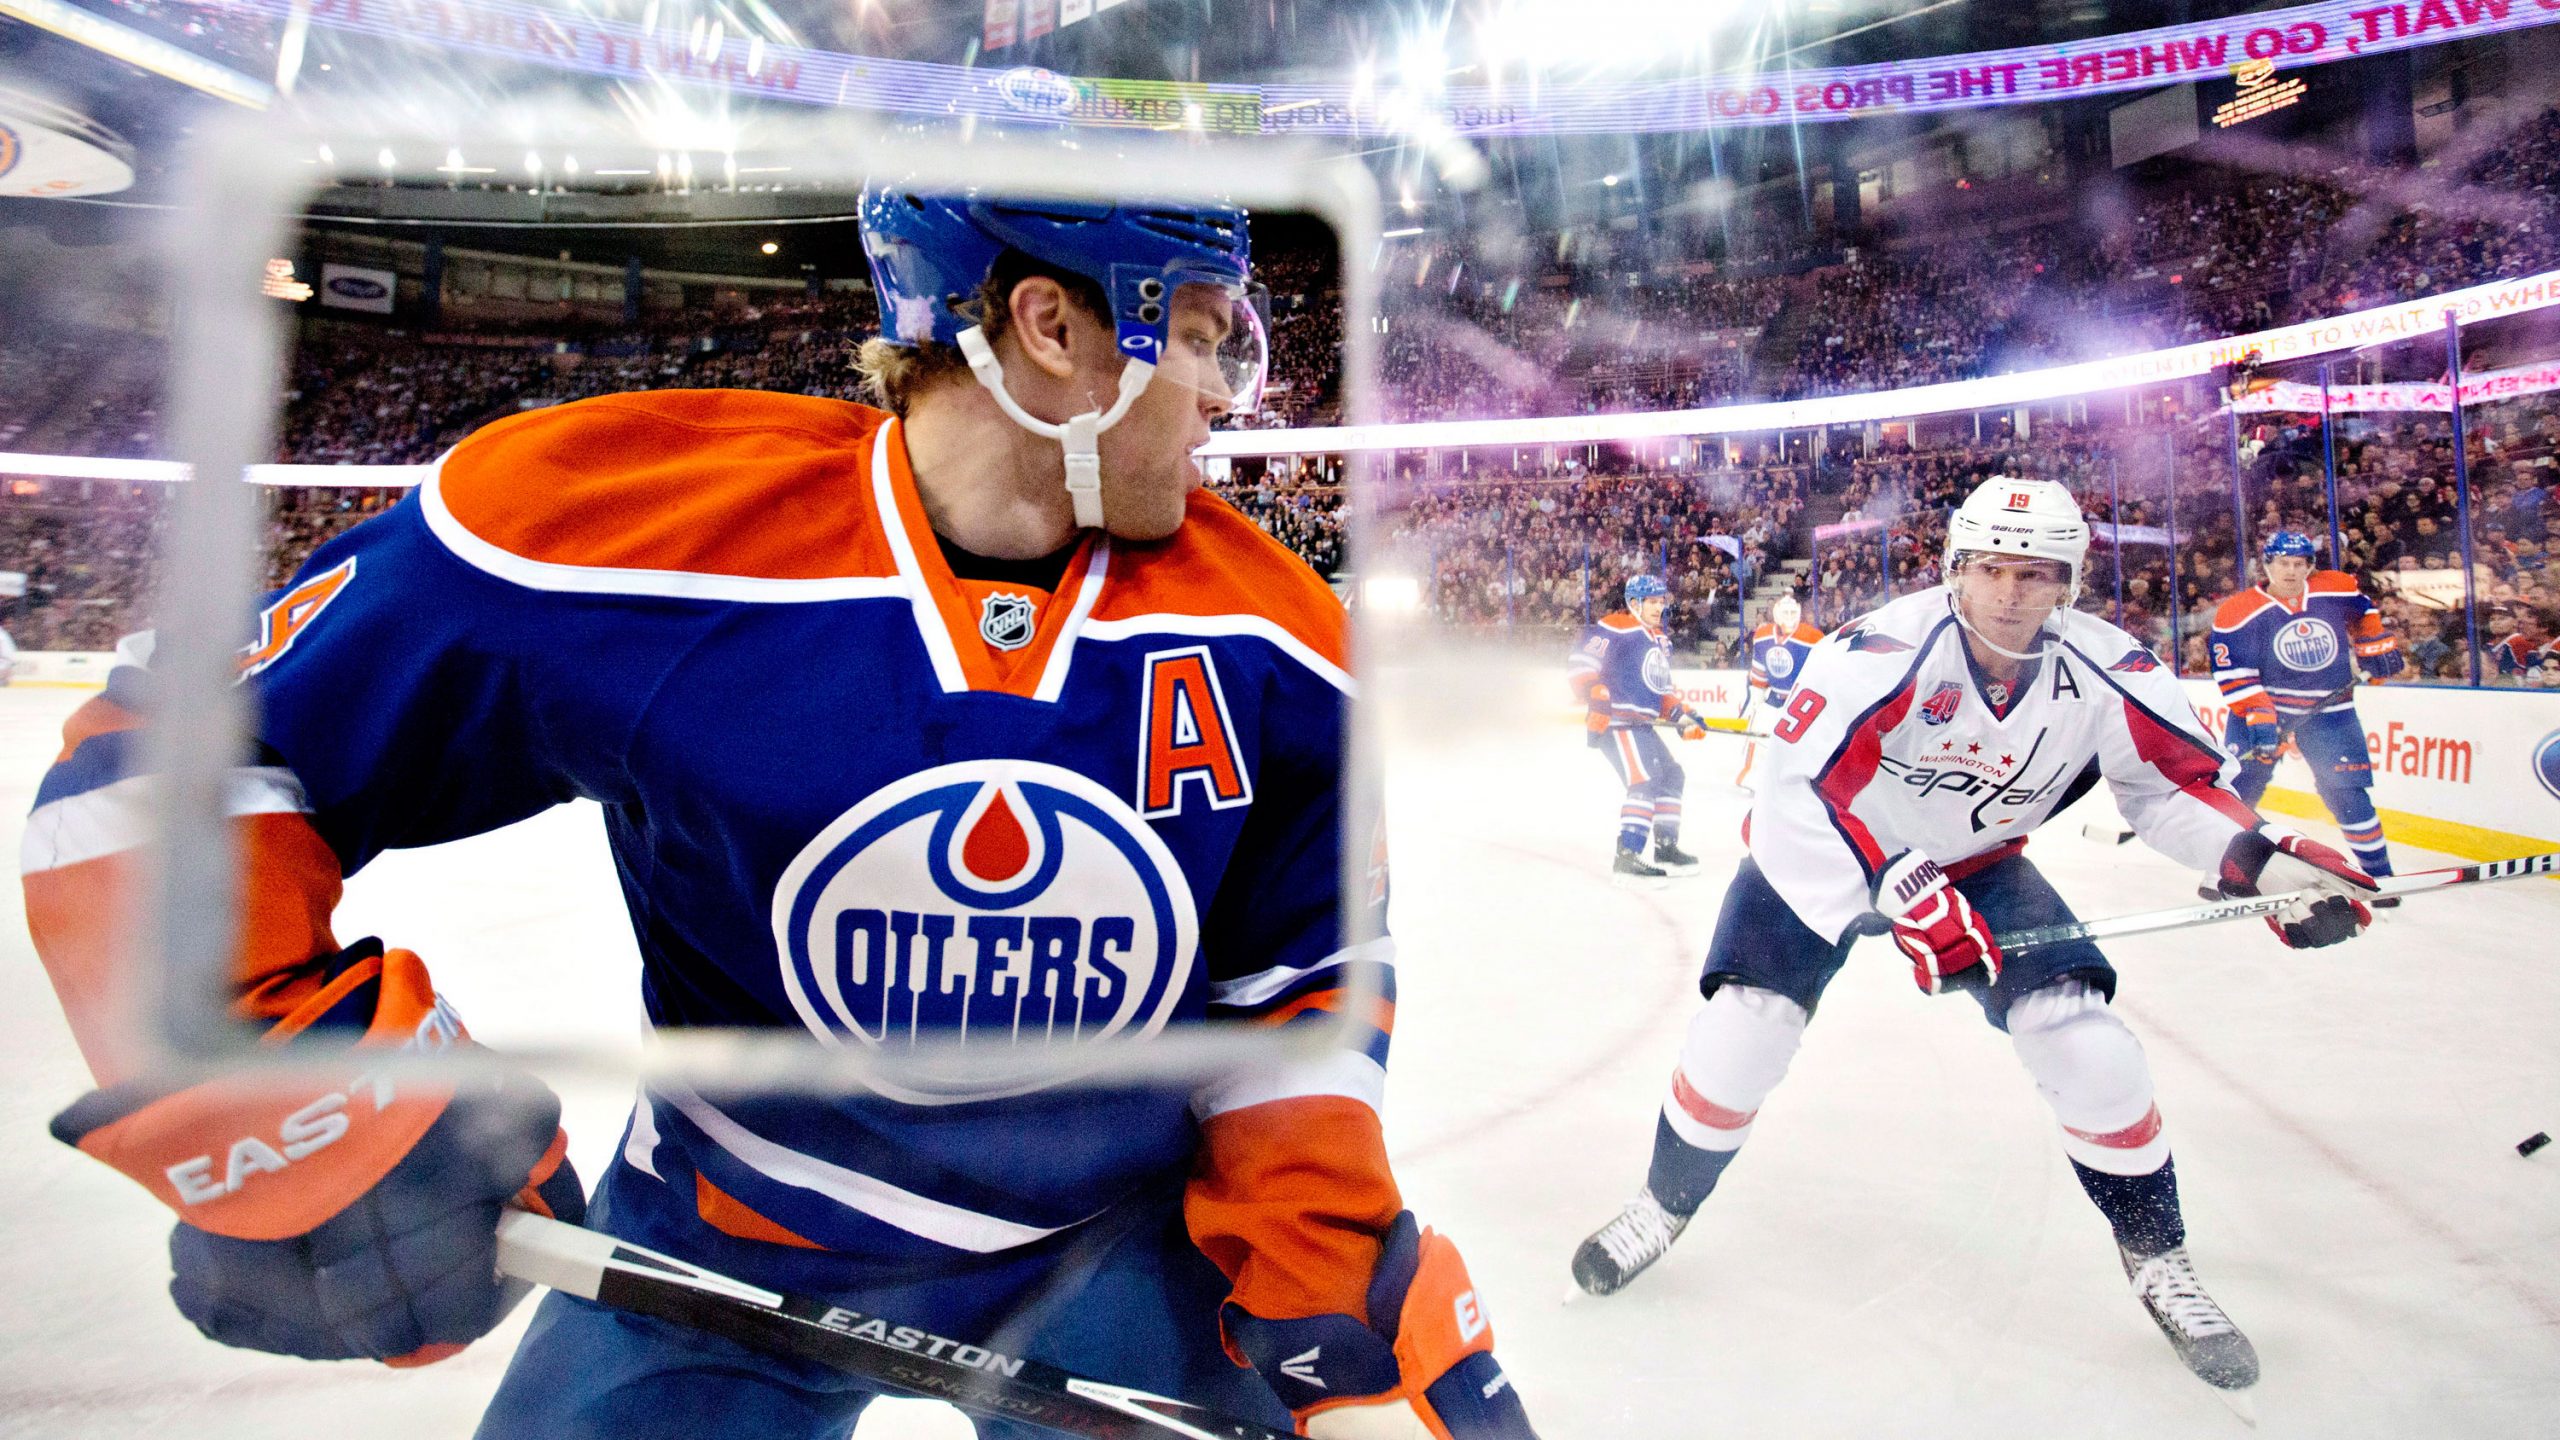 Oilers come off poorly in Hall, Subban story by Friedman